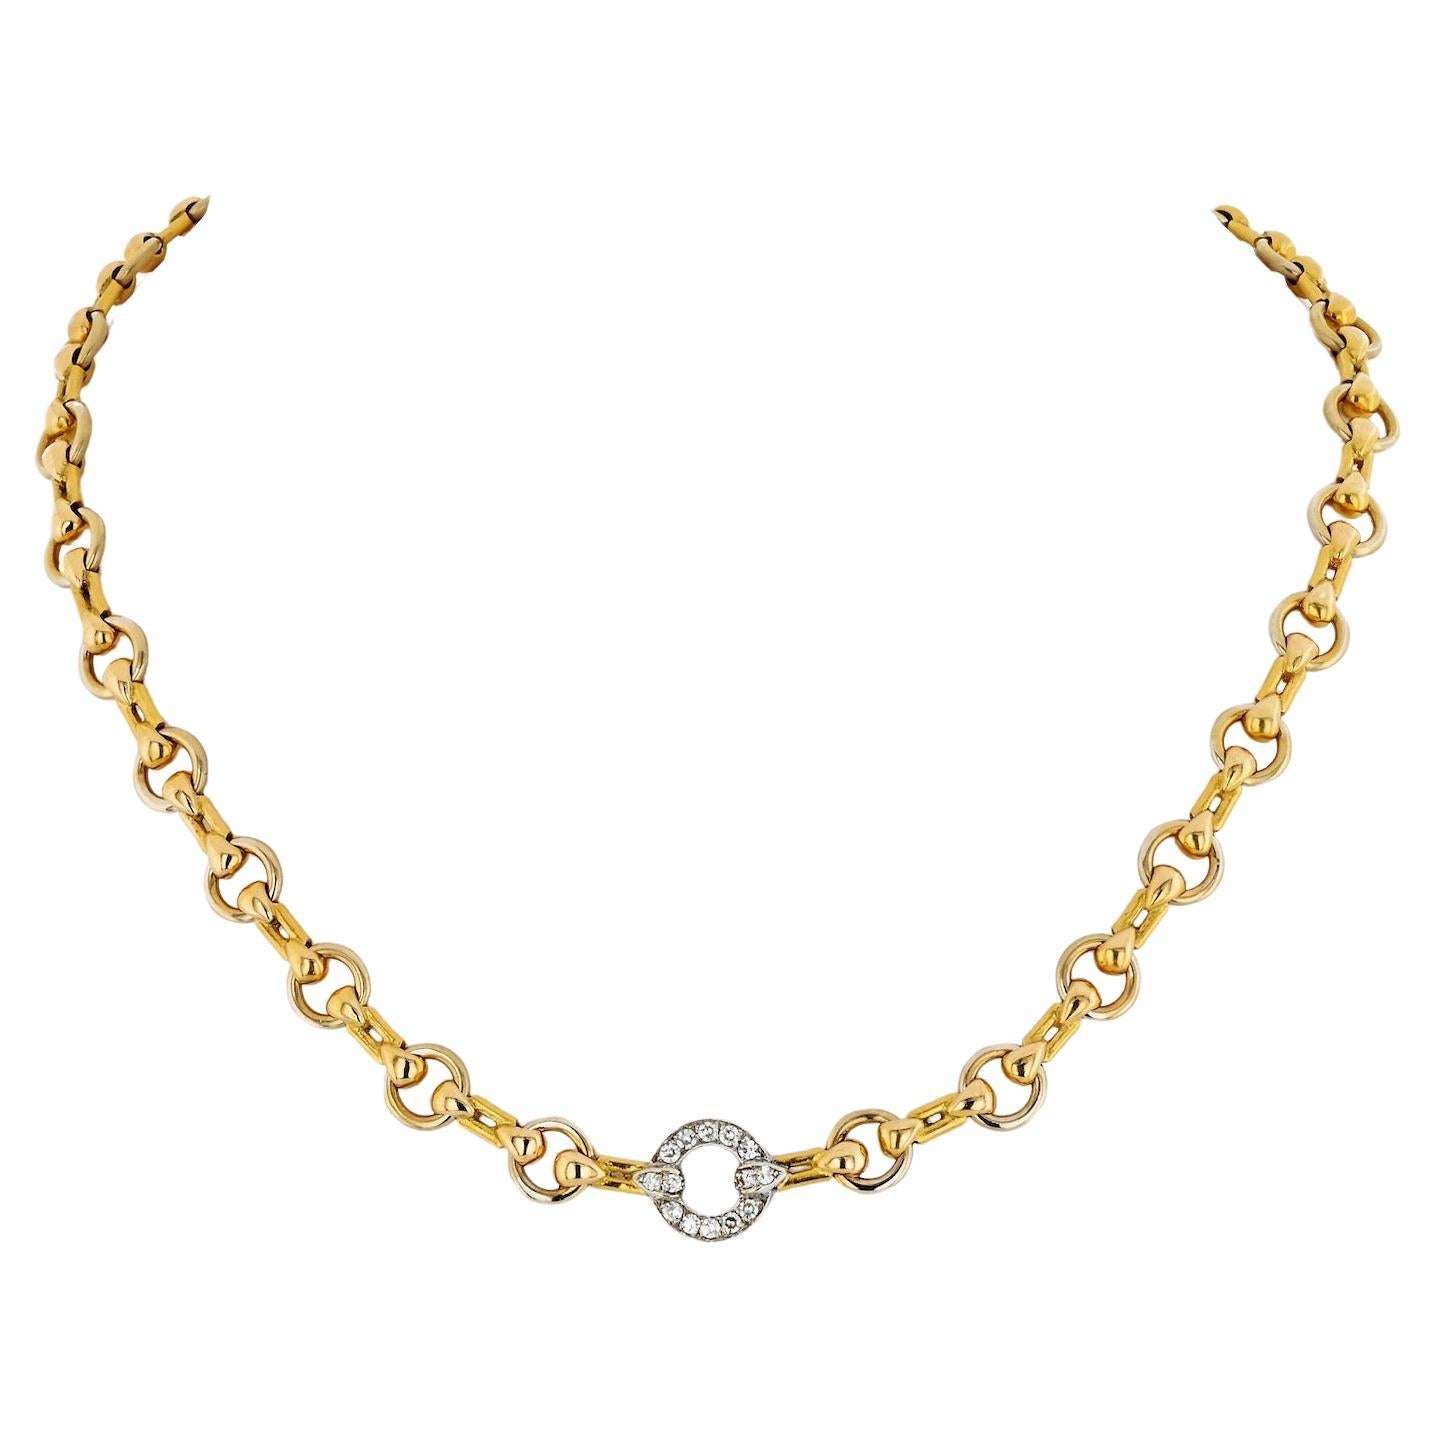 Cartier 18K Yellow Gold Link 16 Inch Chain Necklace